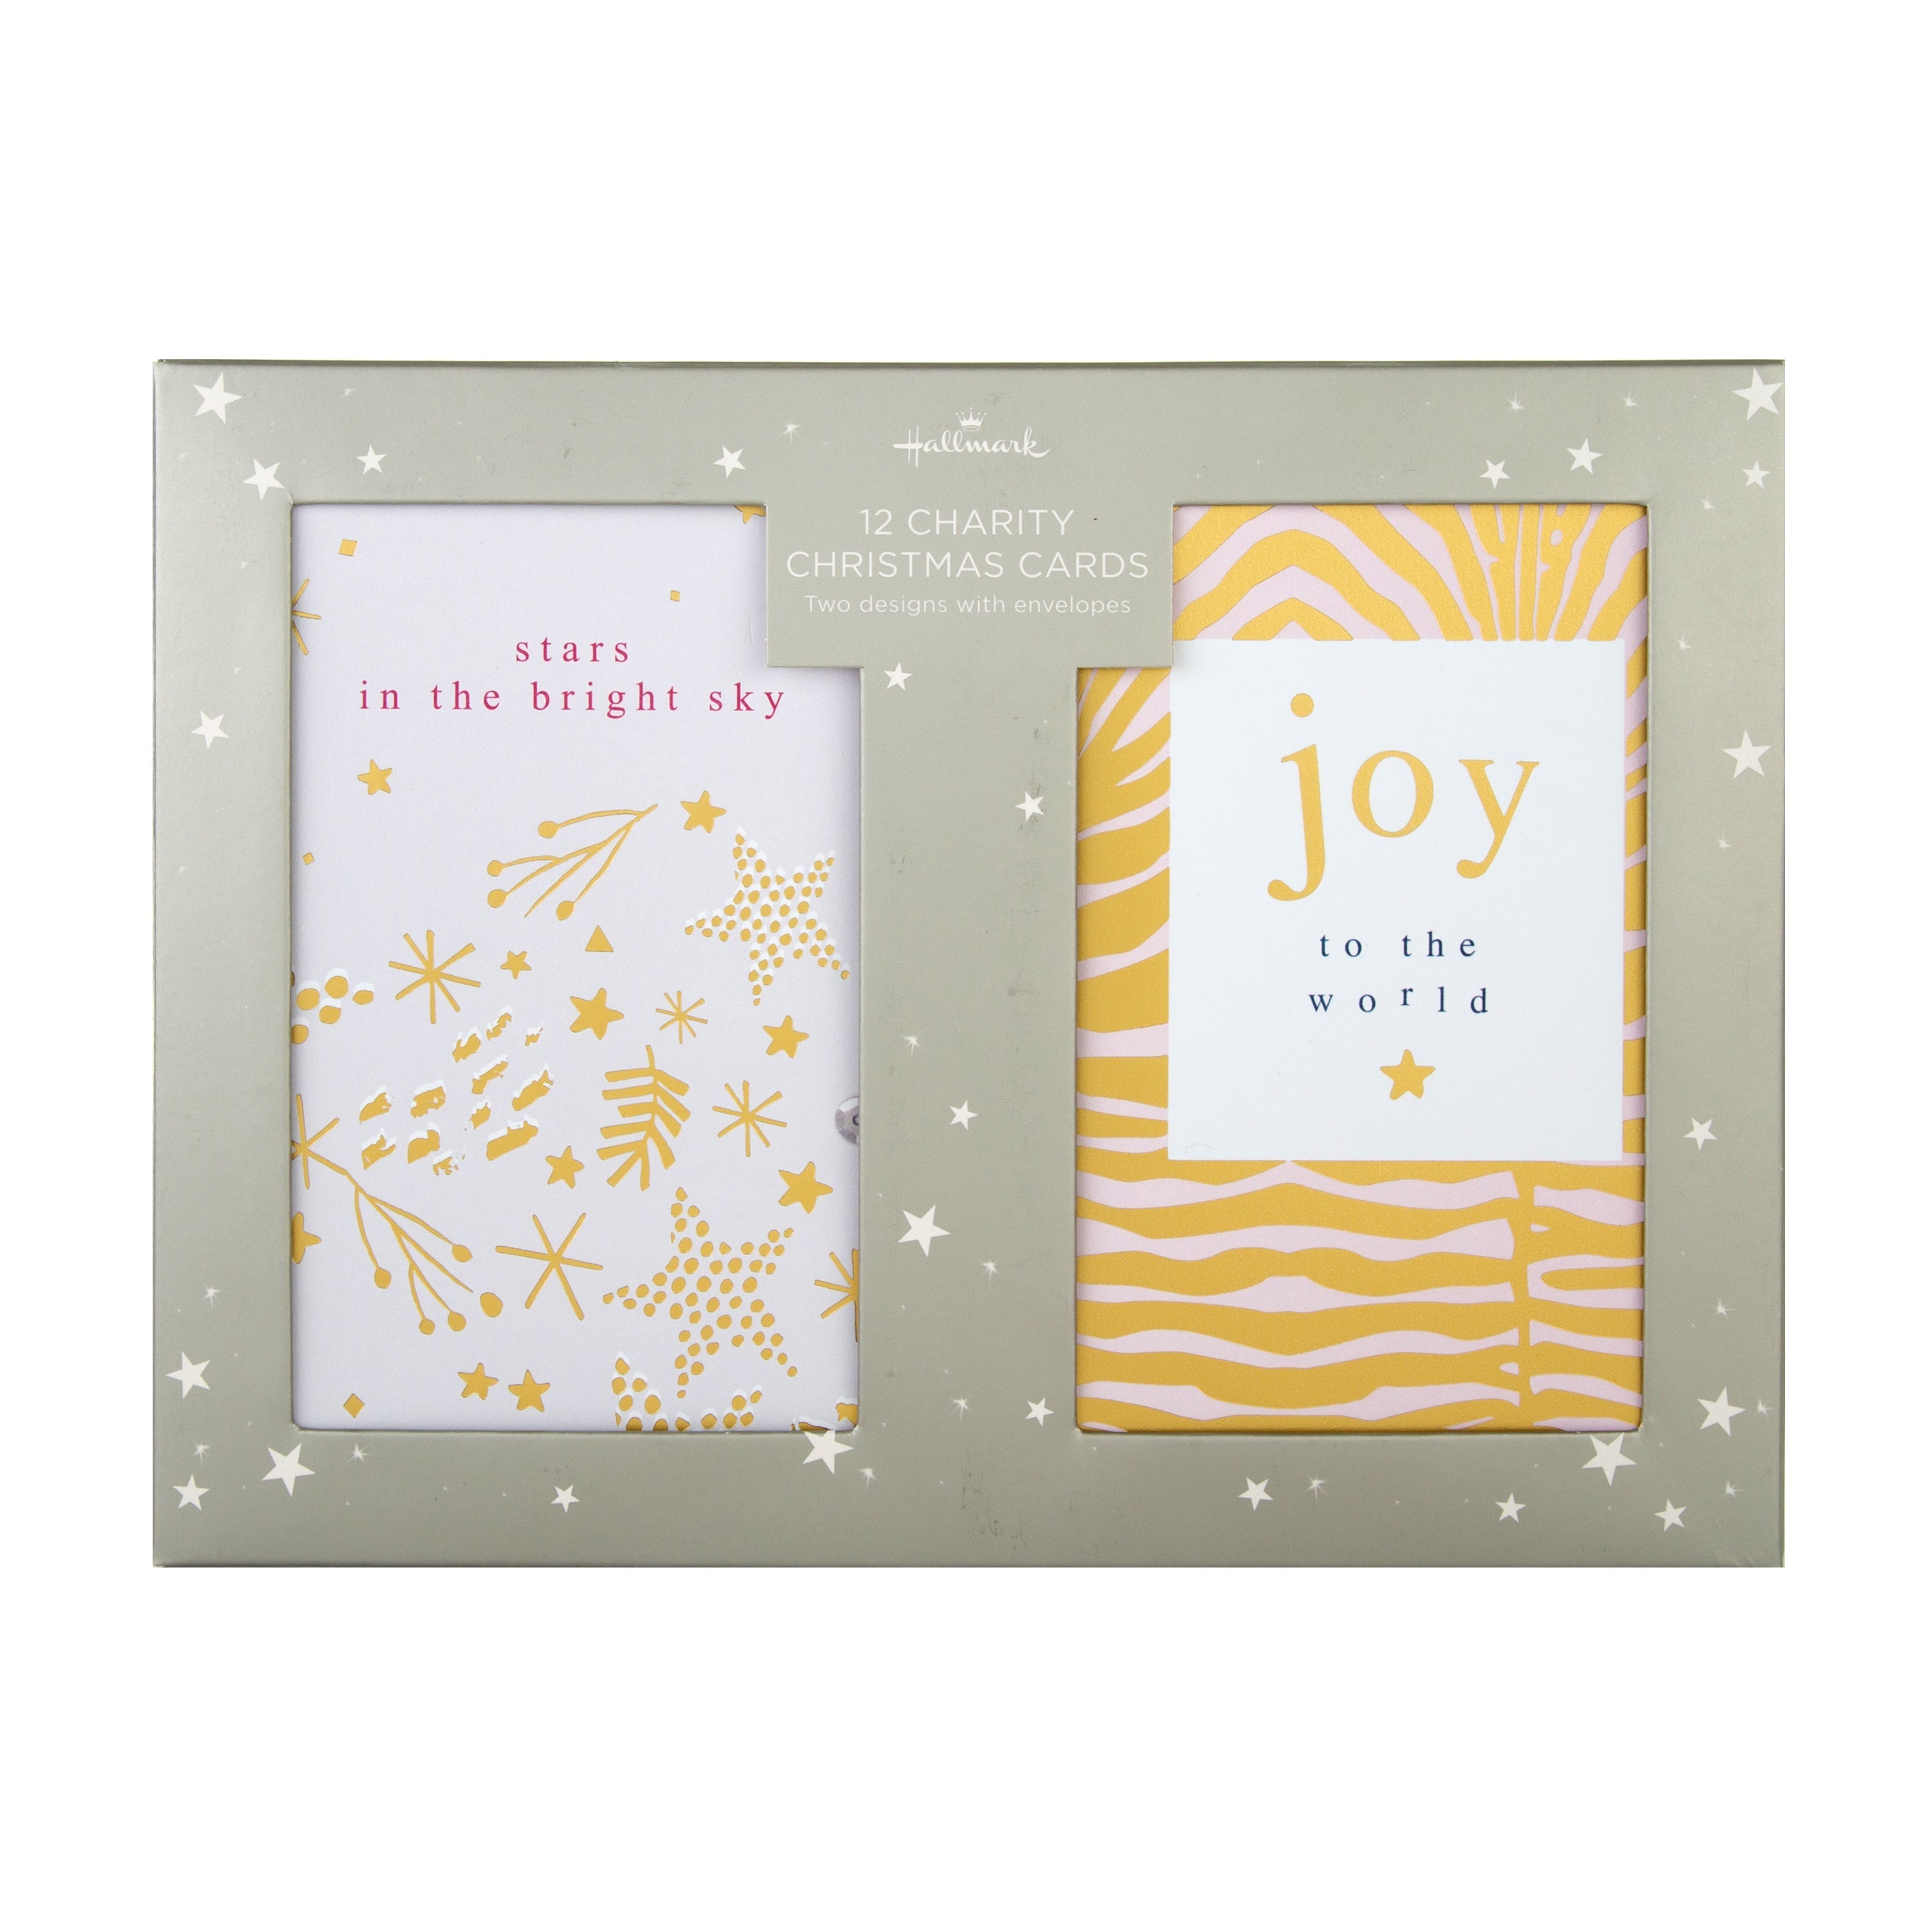 Pack　Cards　in　Contemporary　of　12　Hallmark　Designs　–　with　Go　Charity　Christmas